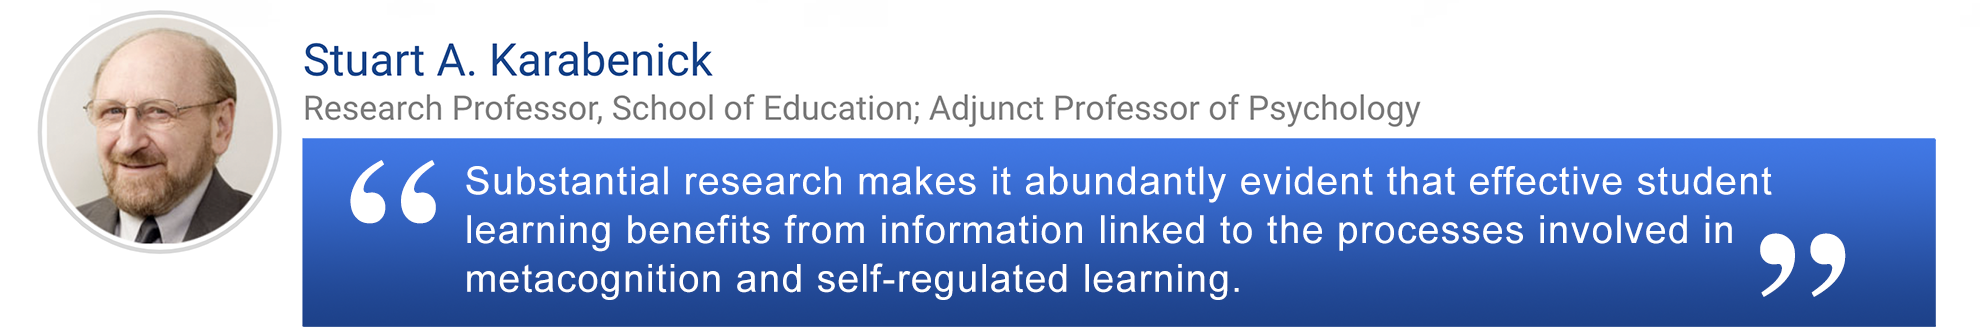 Stuart A. Karabenick quote about the effective student learning benefits from information linked to the processes involved in metacognition and self-regulated learning.